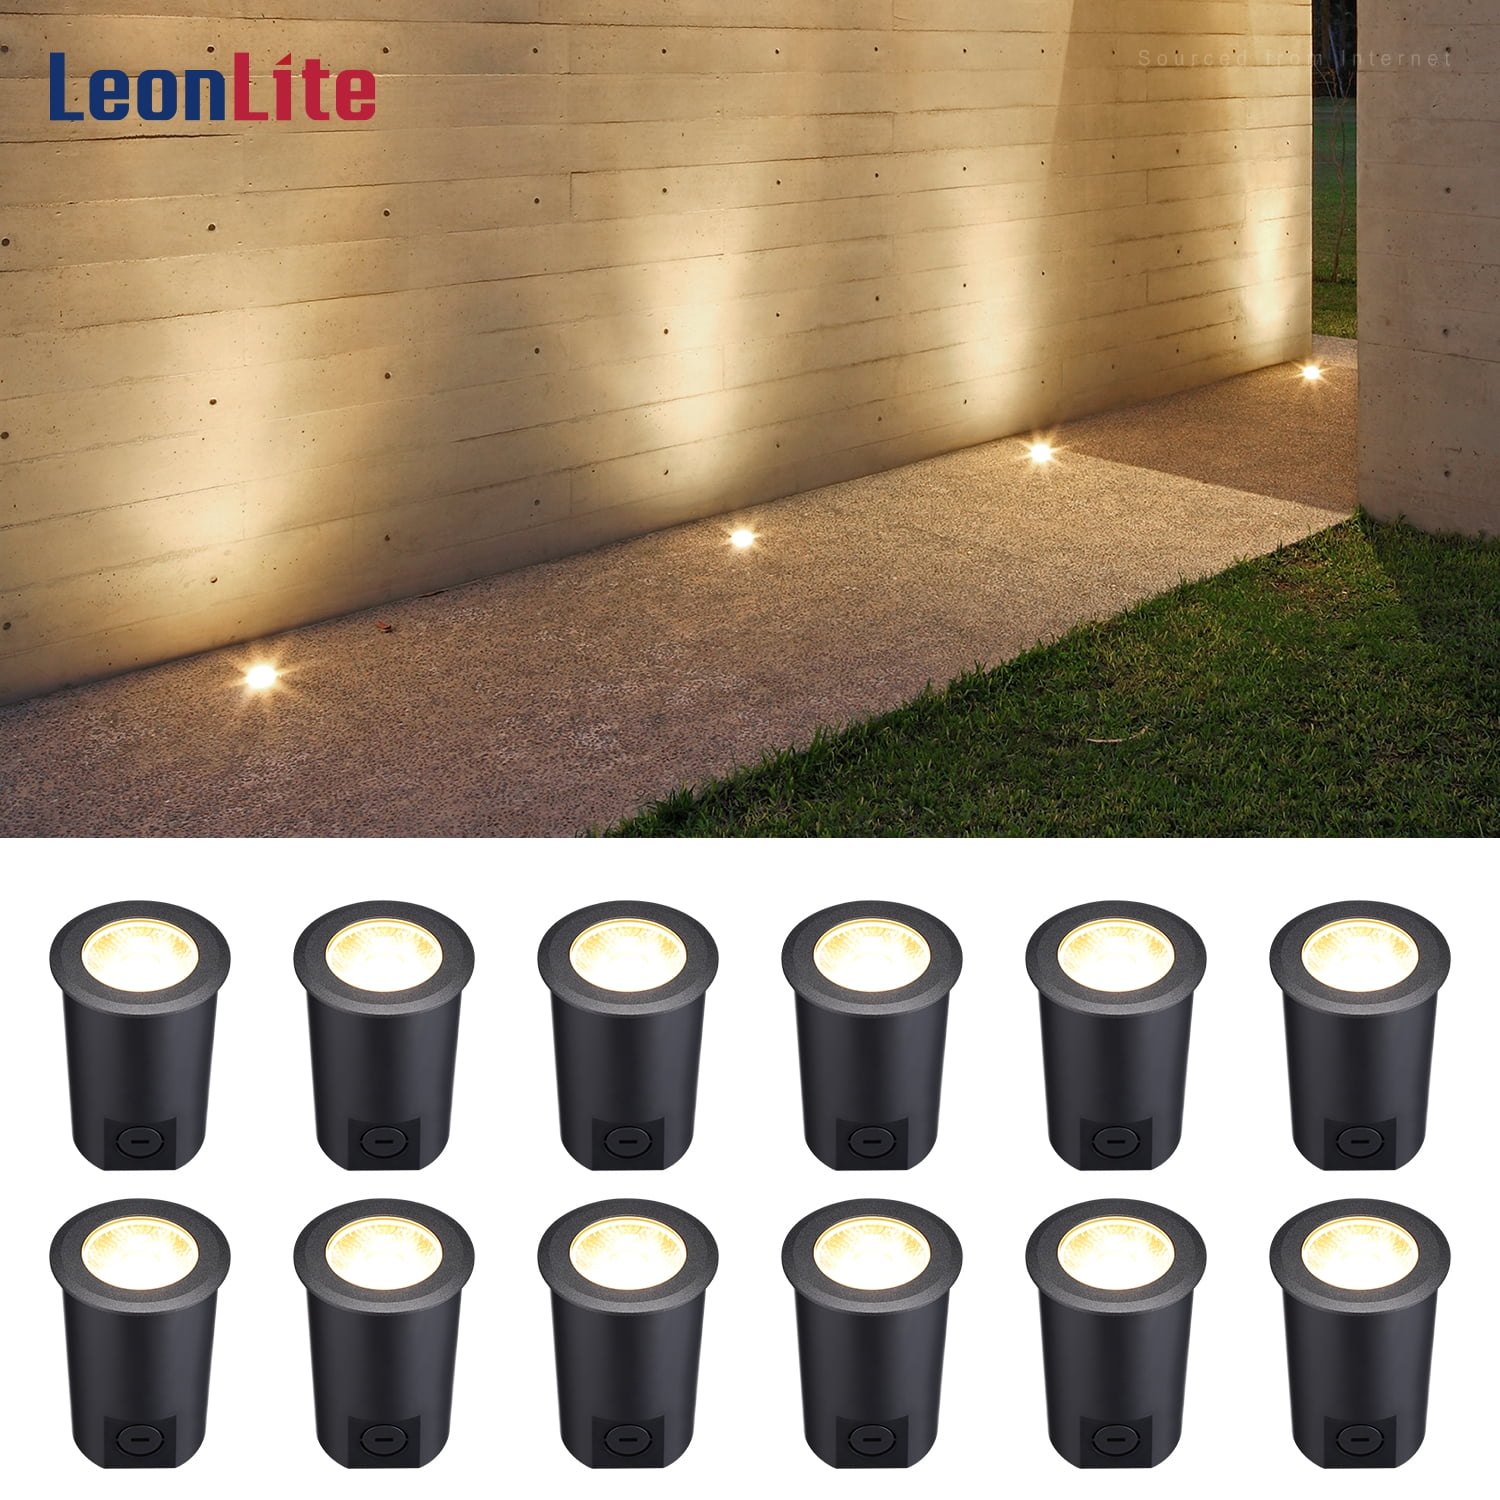 LEONLITE 12 Pack 7W LED Outdoor Well Light, 12-24V AC/DC In-Ground  Landscape Lighting, IP67 Waterproof Linkable Pathway Lights, 3000K Warm  White, for